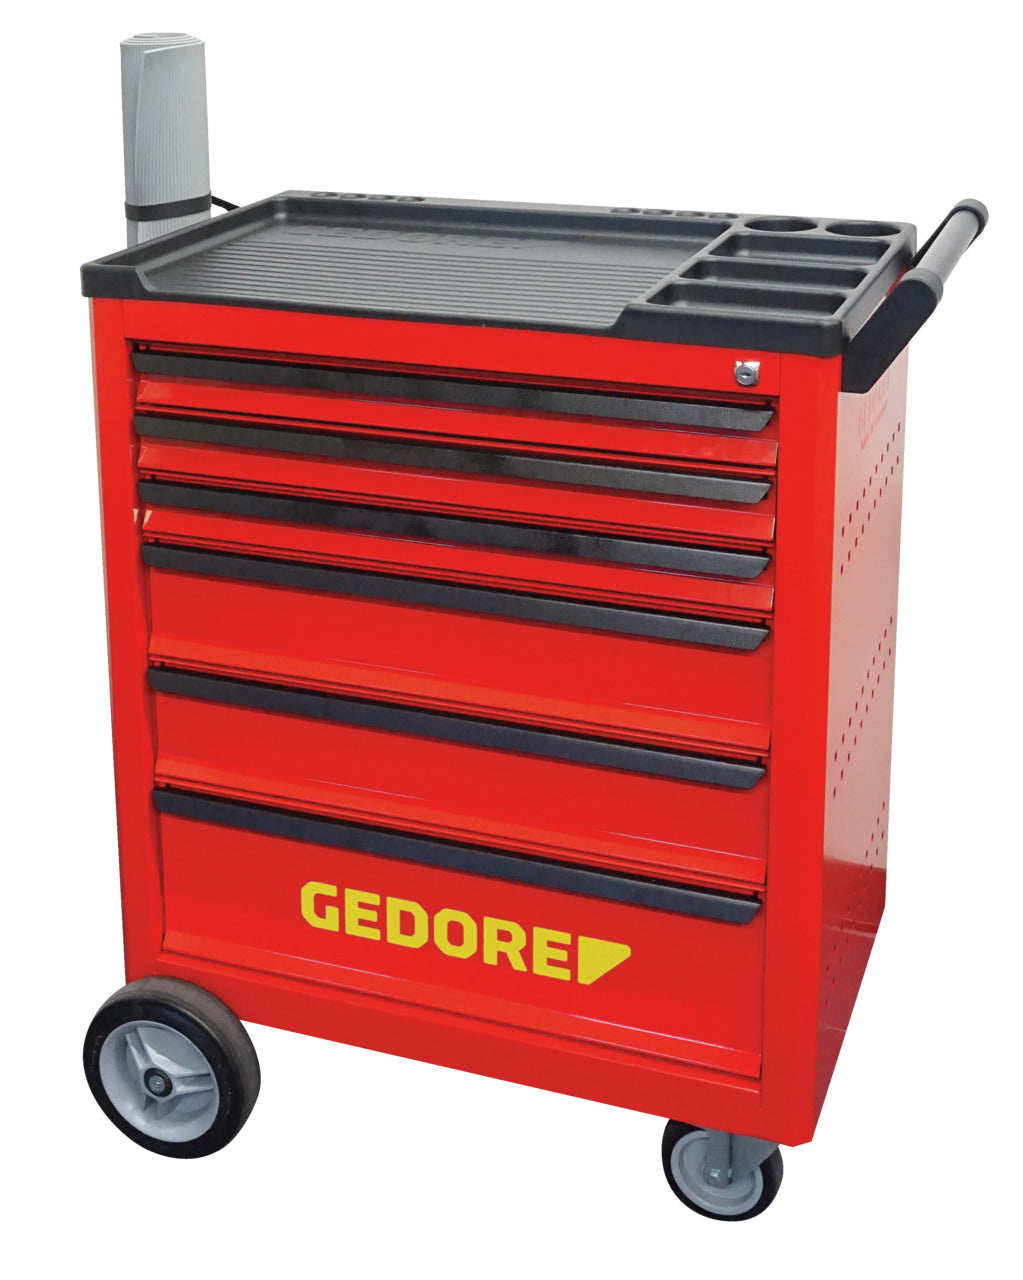 Gedore Tool Trolley with High-Voltage Assortment (103 parts)